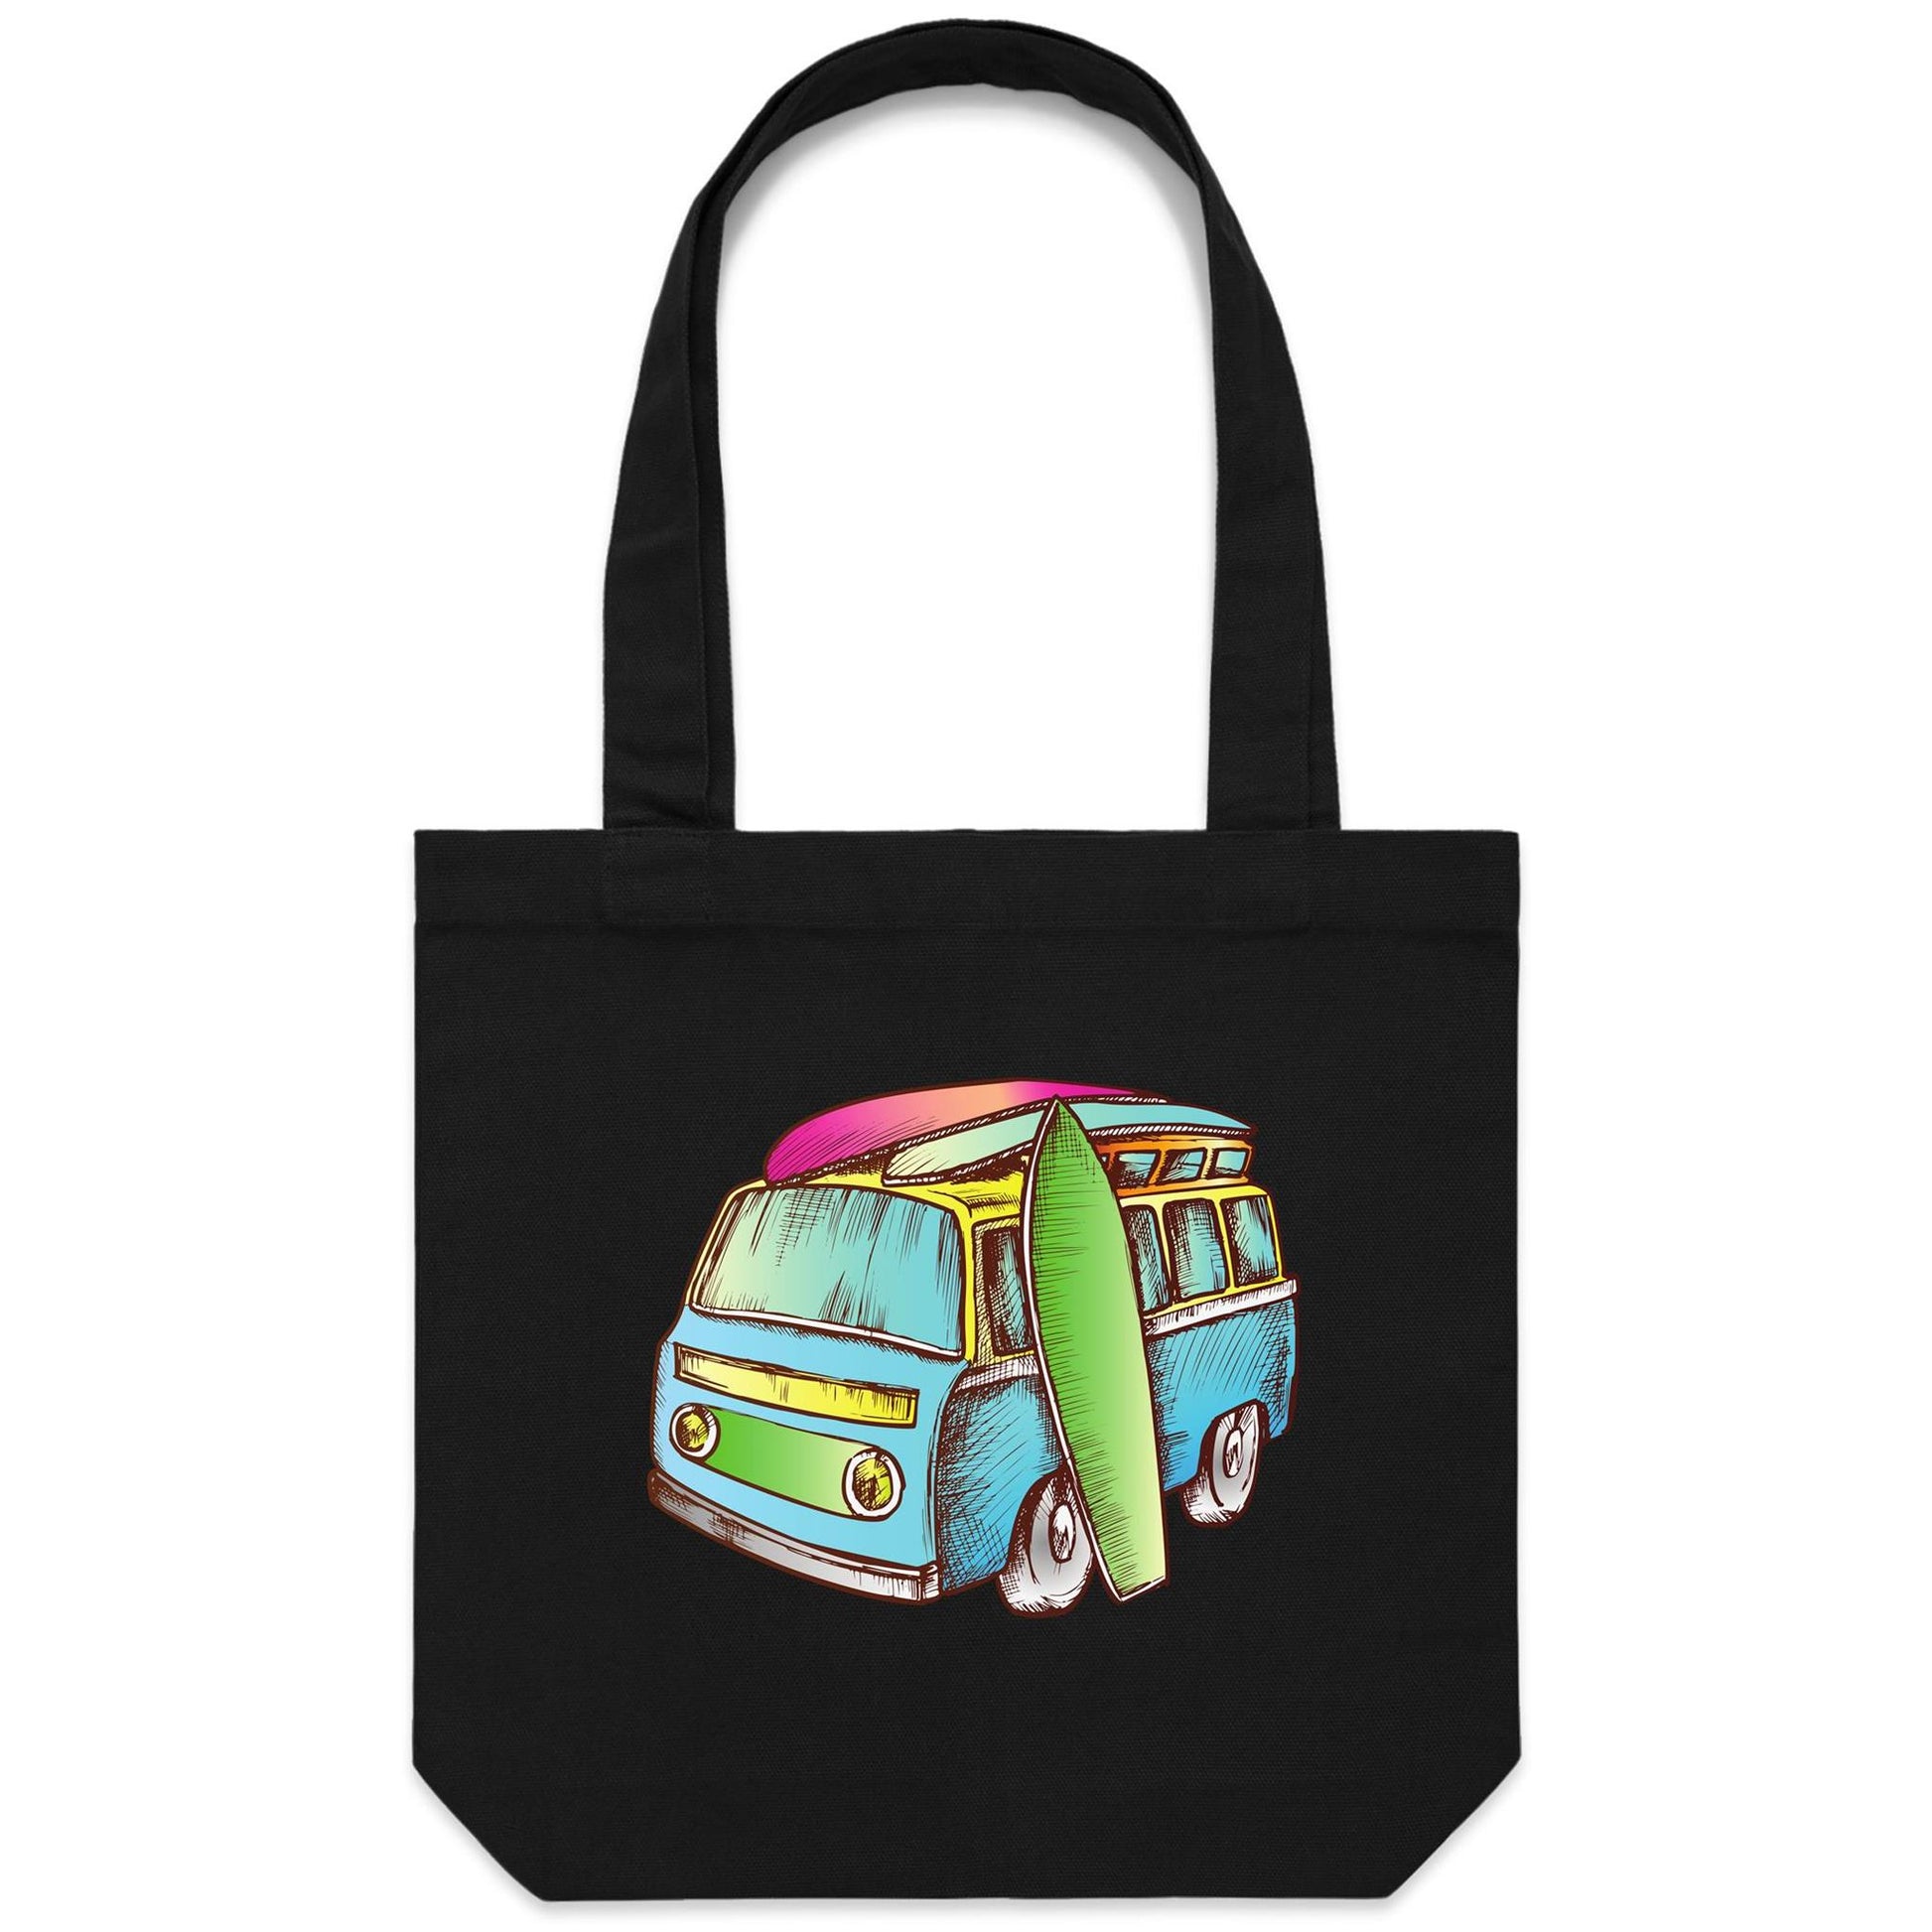 Surf Trip - Canvas Tote Bag Black One-Size Tote Bag Summer